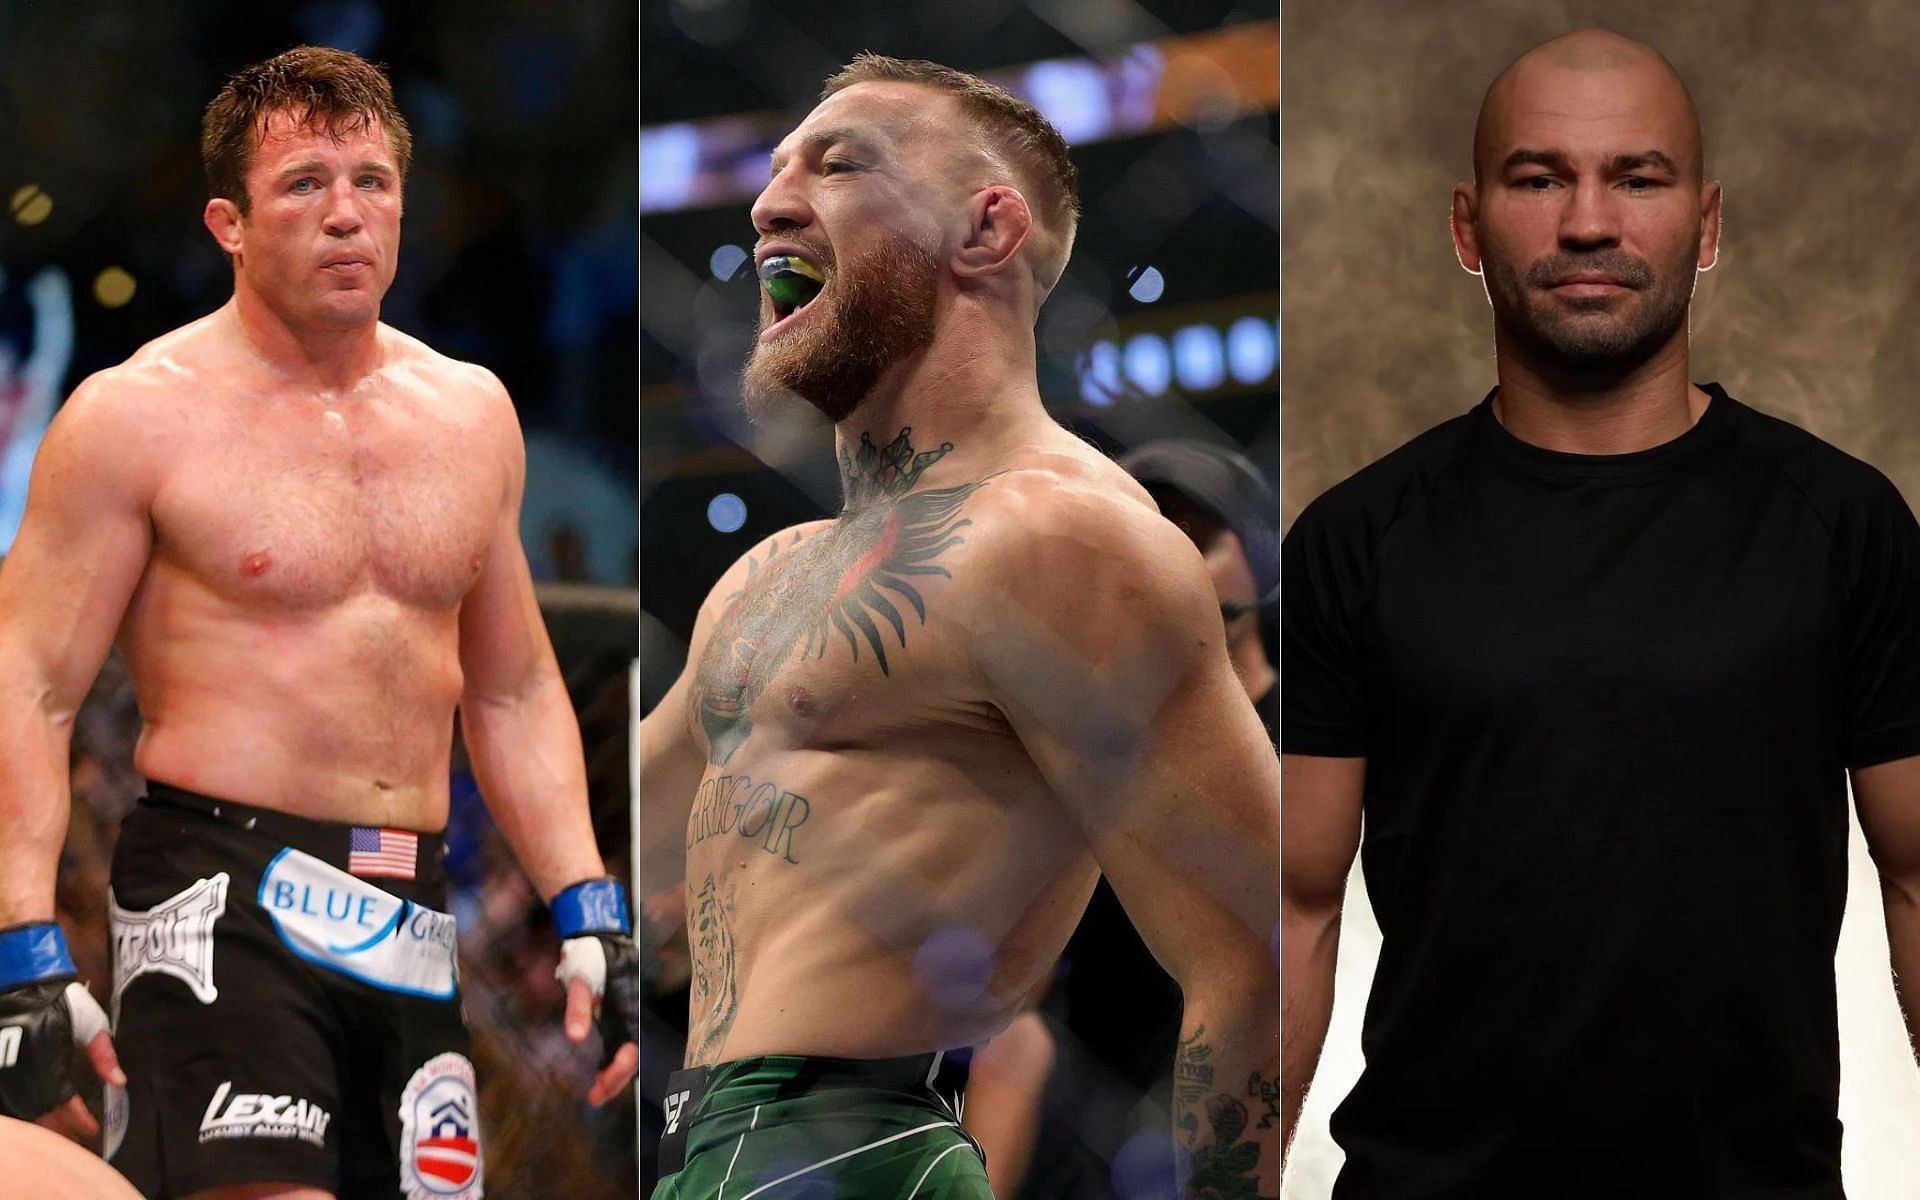 Chael Sonnen (left), Conor McGregor (middle) and Artem Lobov (right)